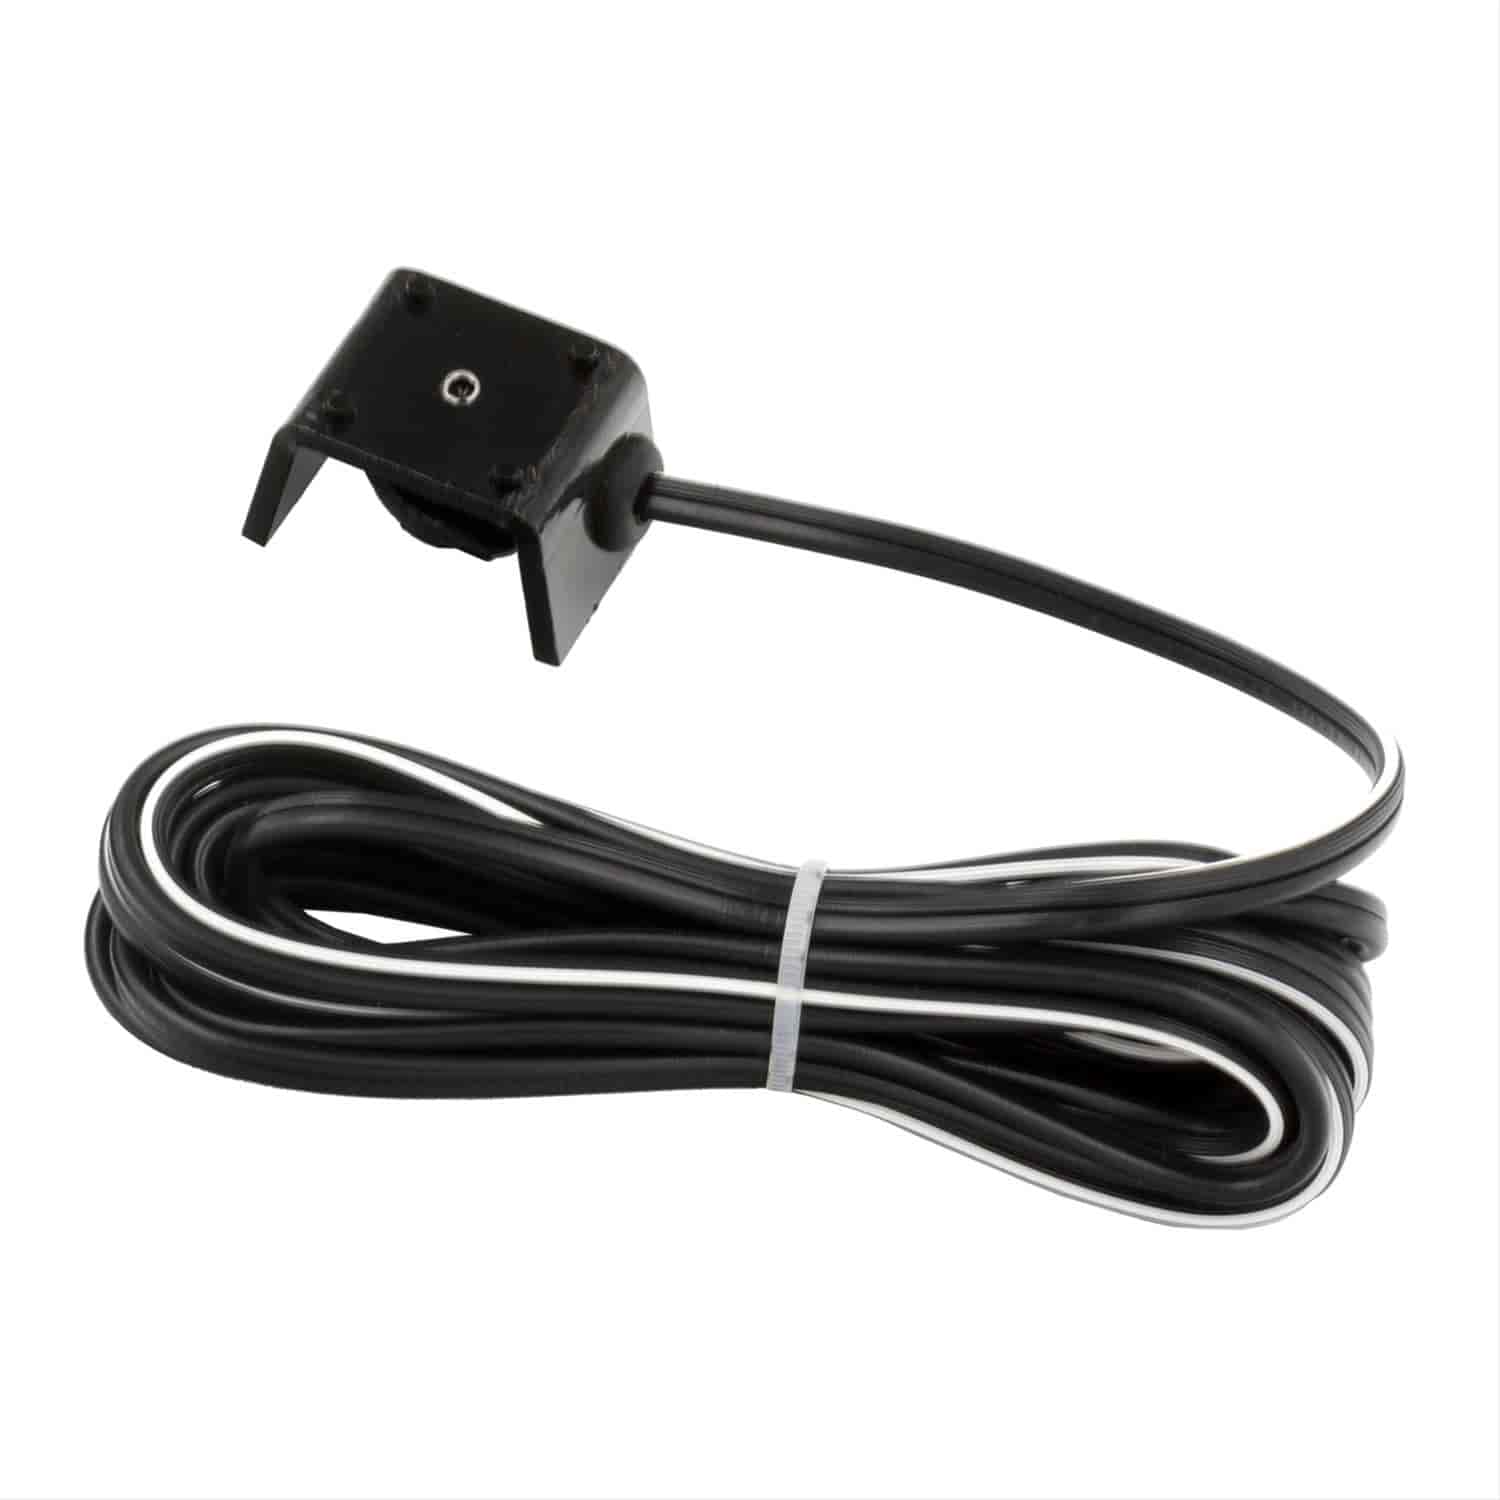 Replacement Tachometer Probe For Use With Diesel Engines